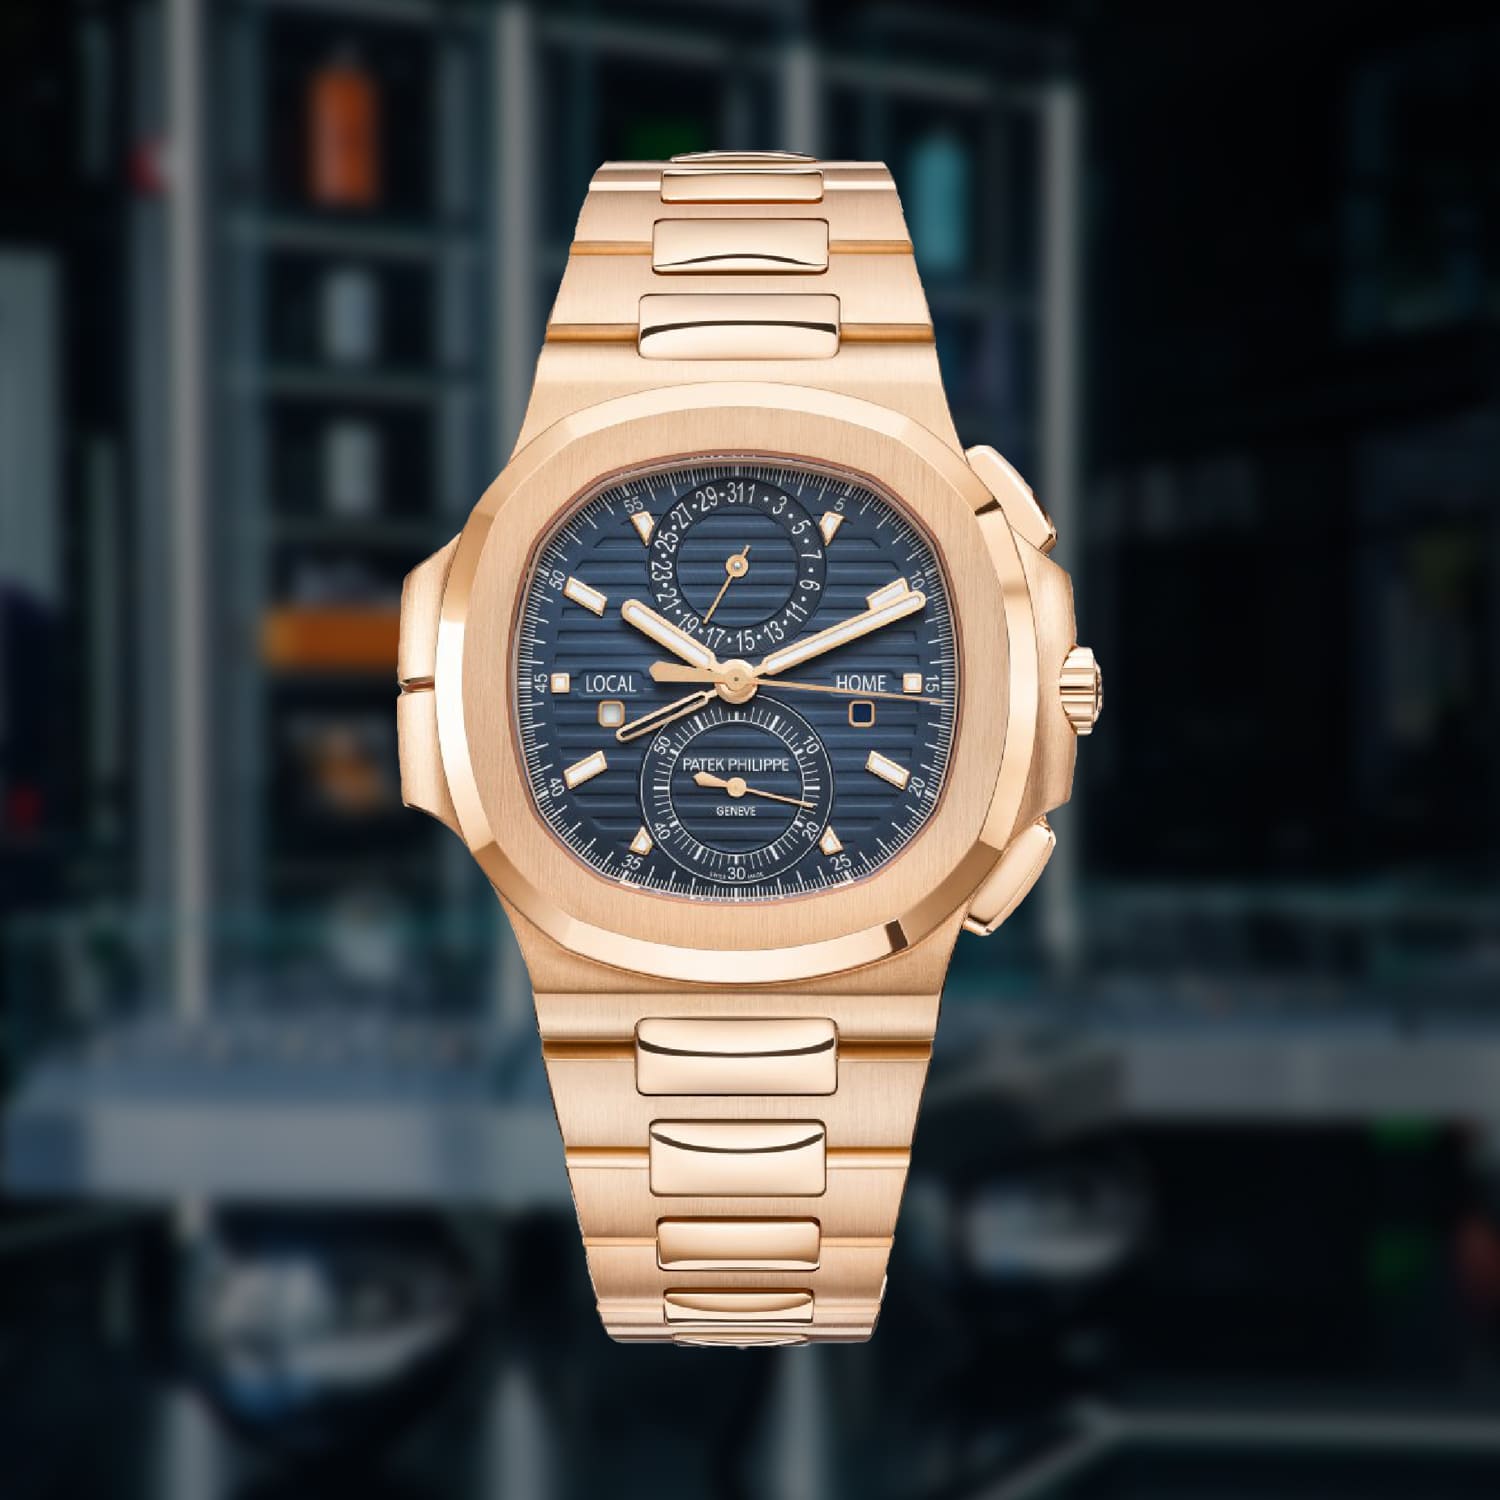 Patek Philippe 5990R Rose Gold , Blue Dial | The Watch Meister